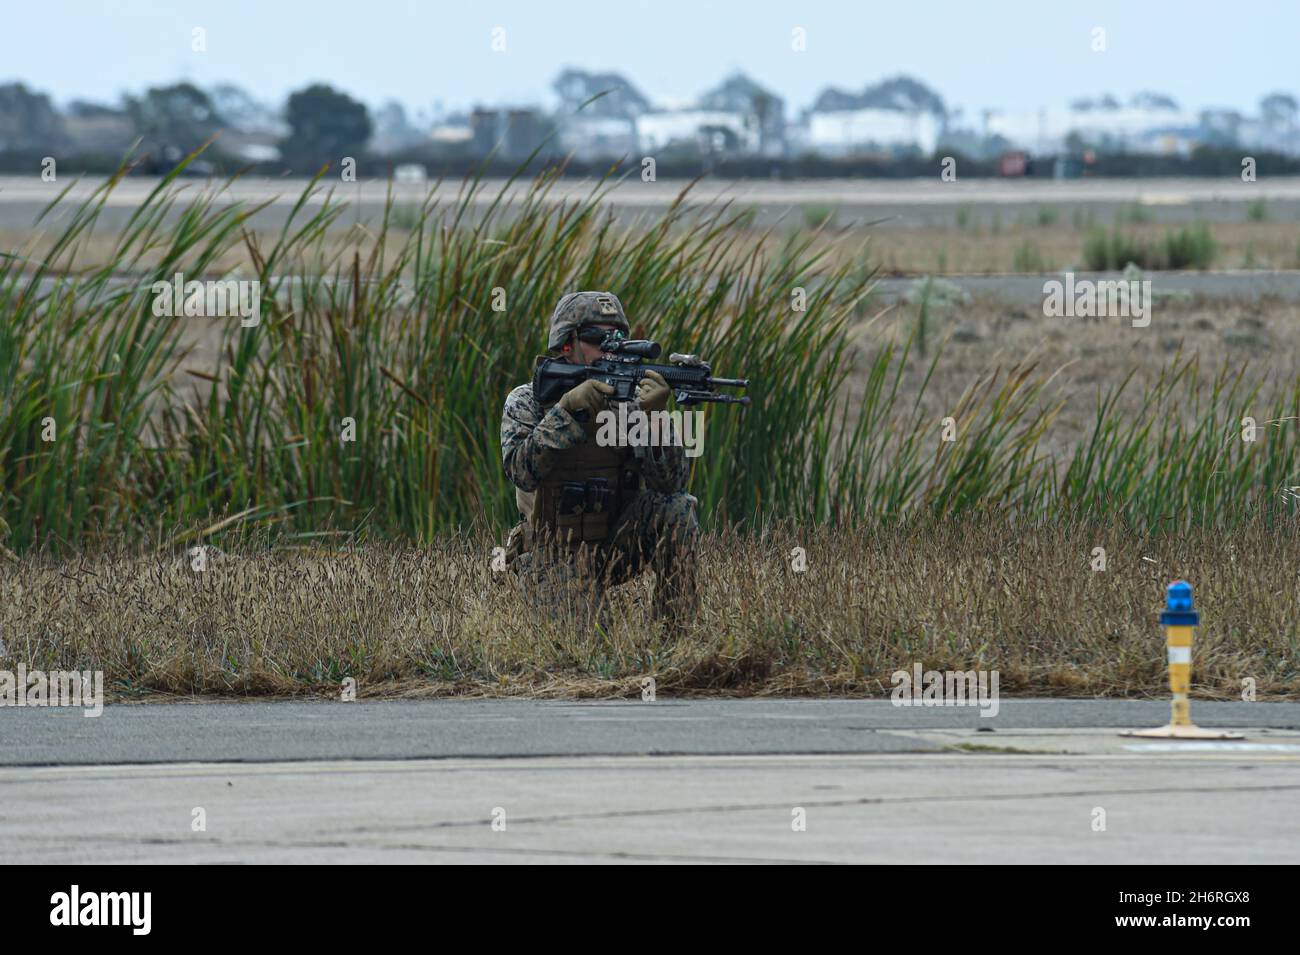 Marines advance on their objective during a MAGTF demonstration at MCAS Miramar in San Diego, California. Stock Photo